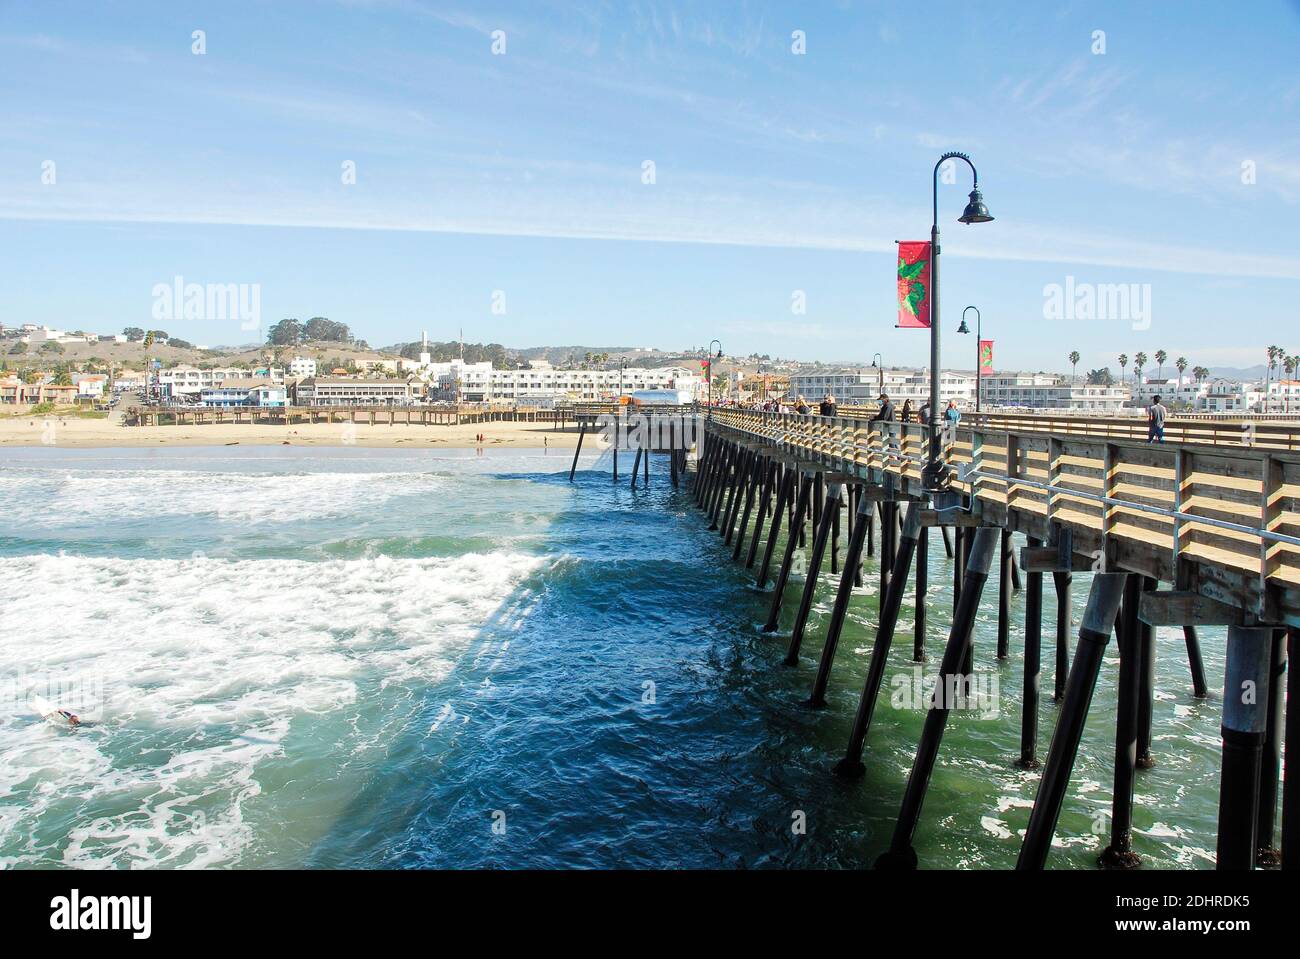 The pier at Pismo Beach in San Luis Obispo County, California, famous for its Pismo Clams, beaches, and sand dunes. Stock Photo